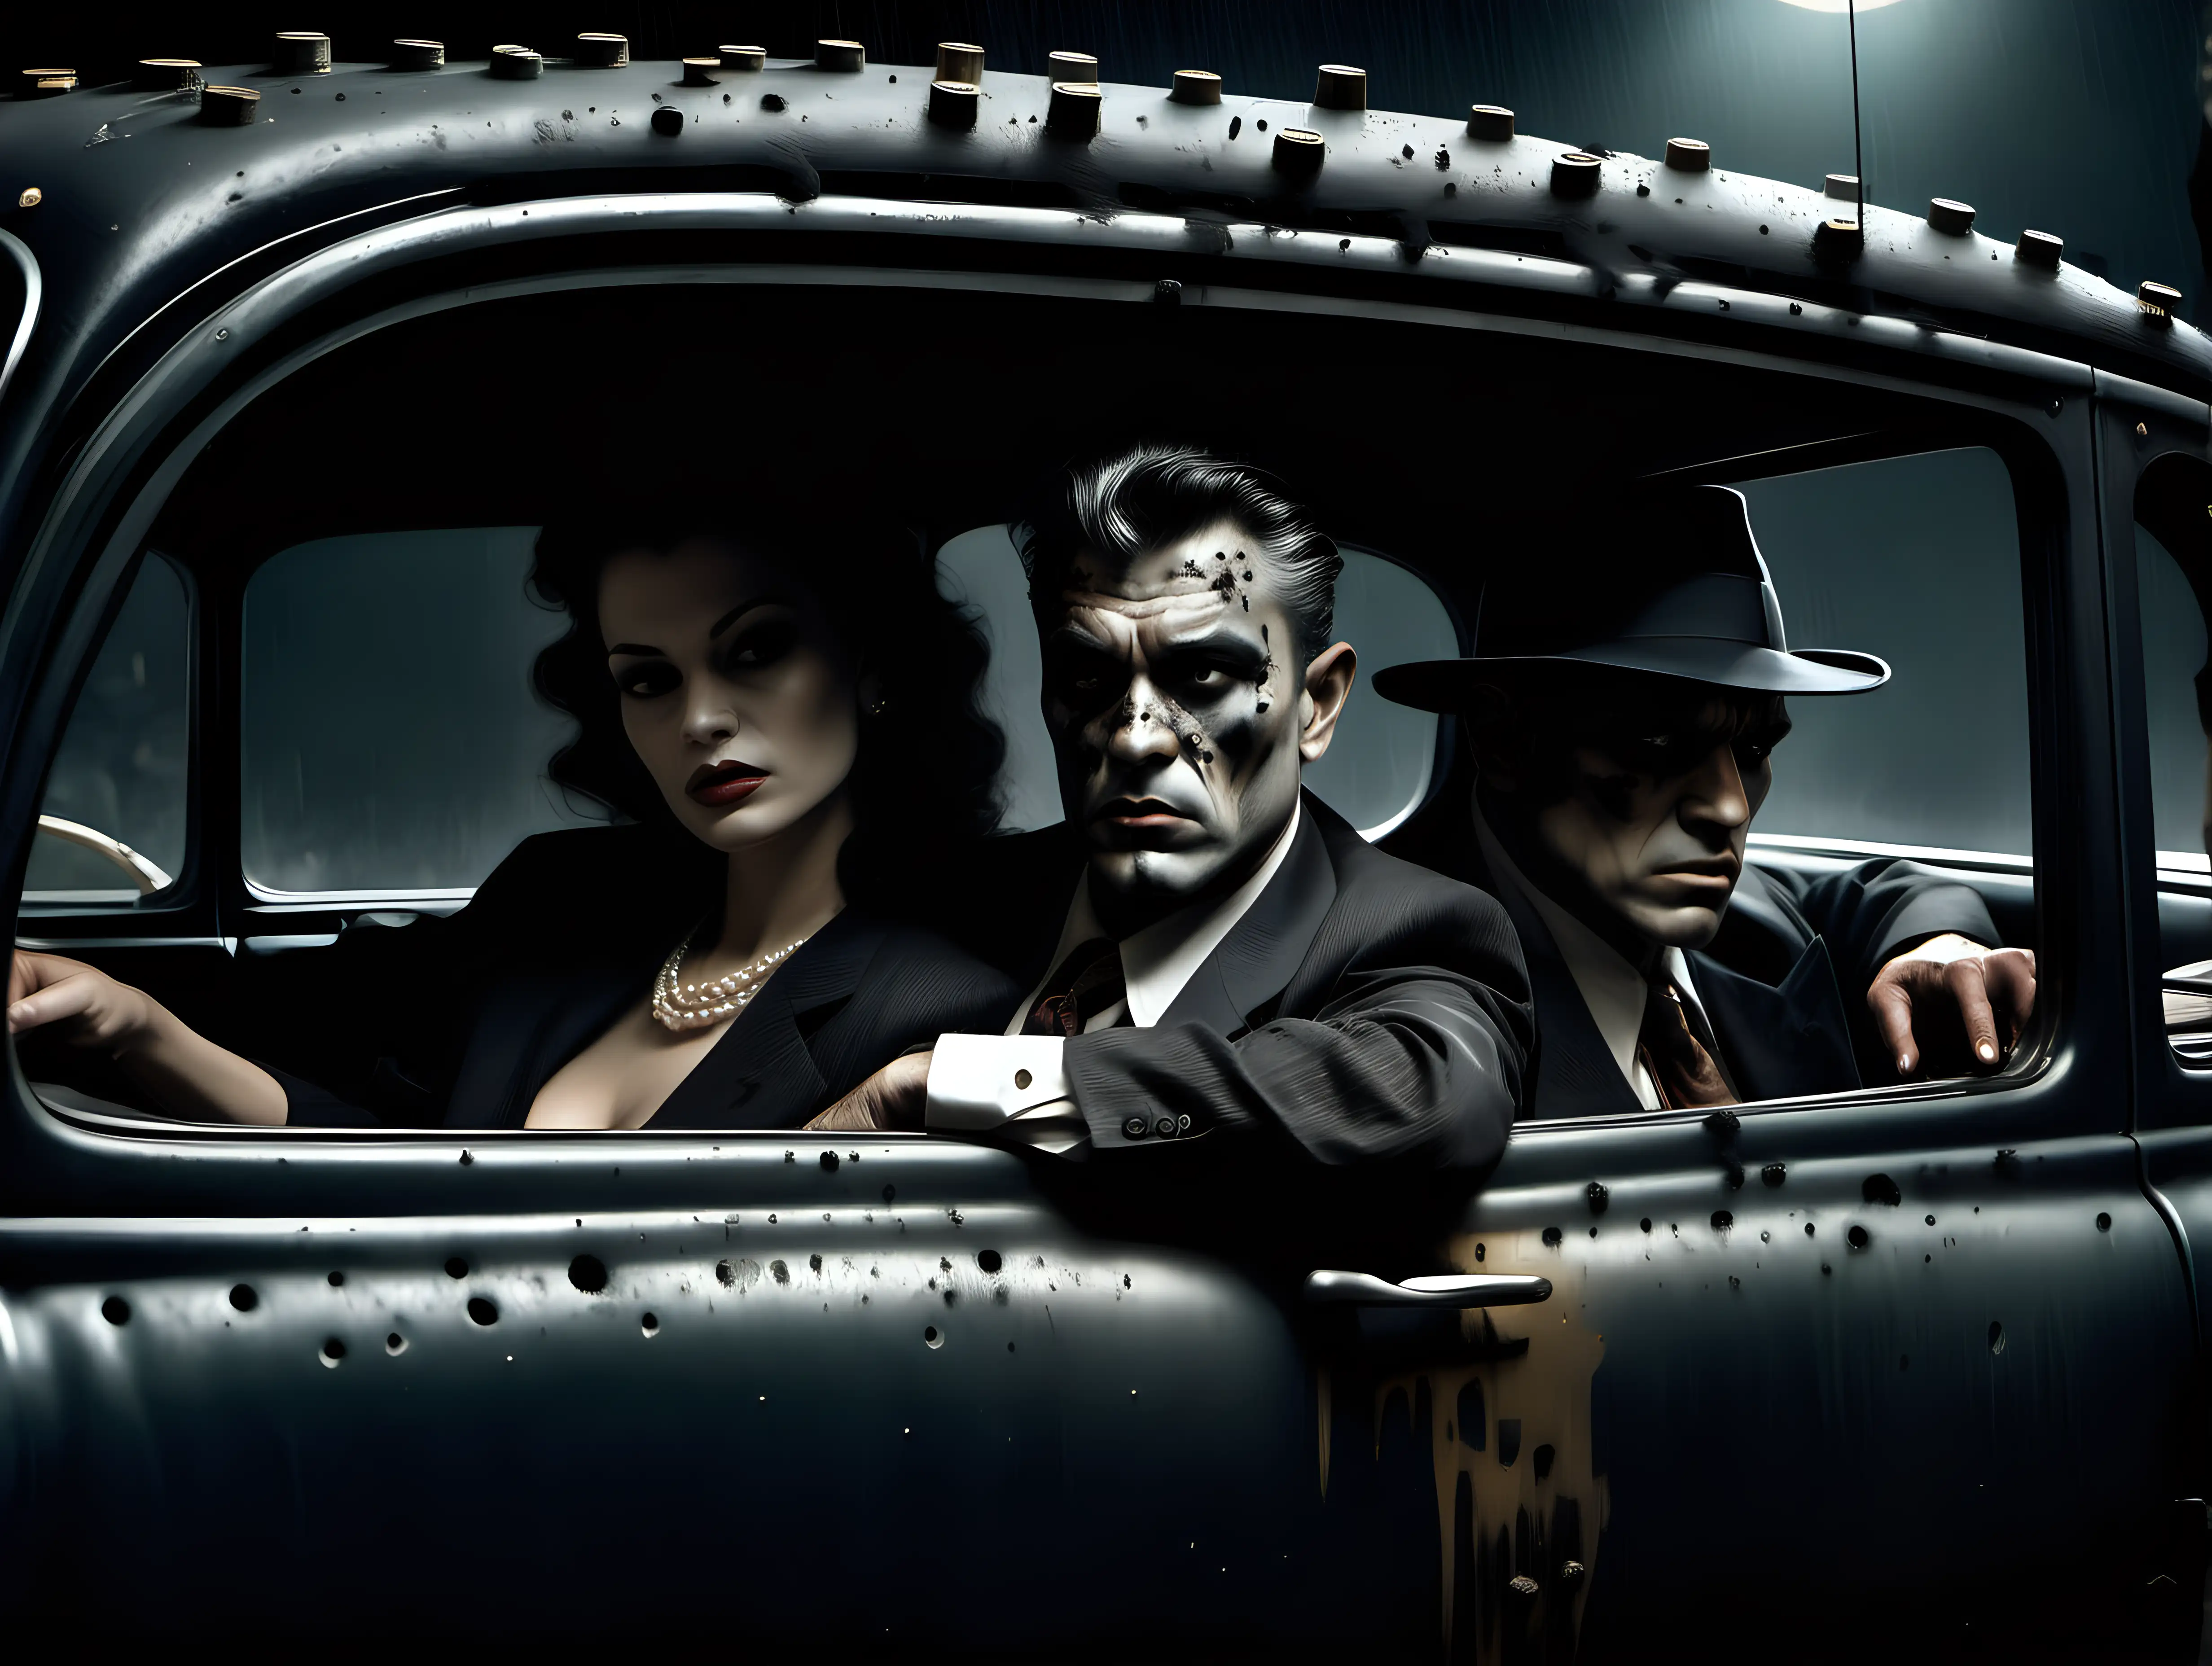 Gangsters in car with bullet holes in style of realism by frank frazetta and annie leibovitz, emotive and moody and muted, dark background